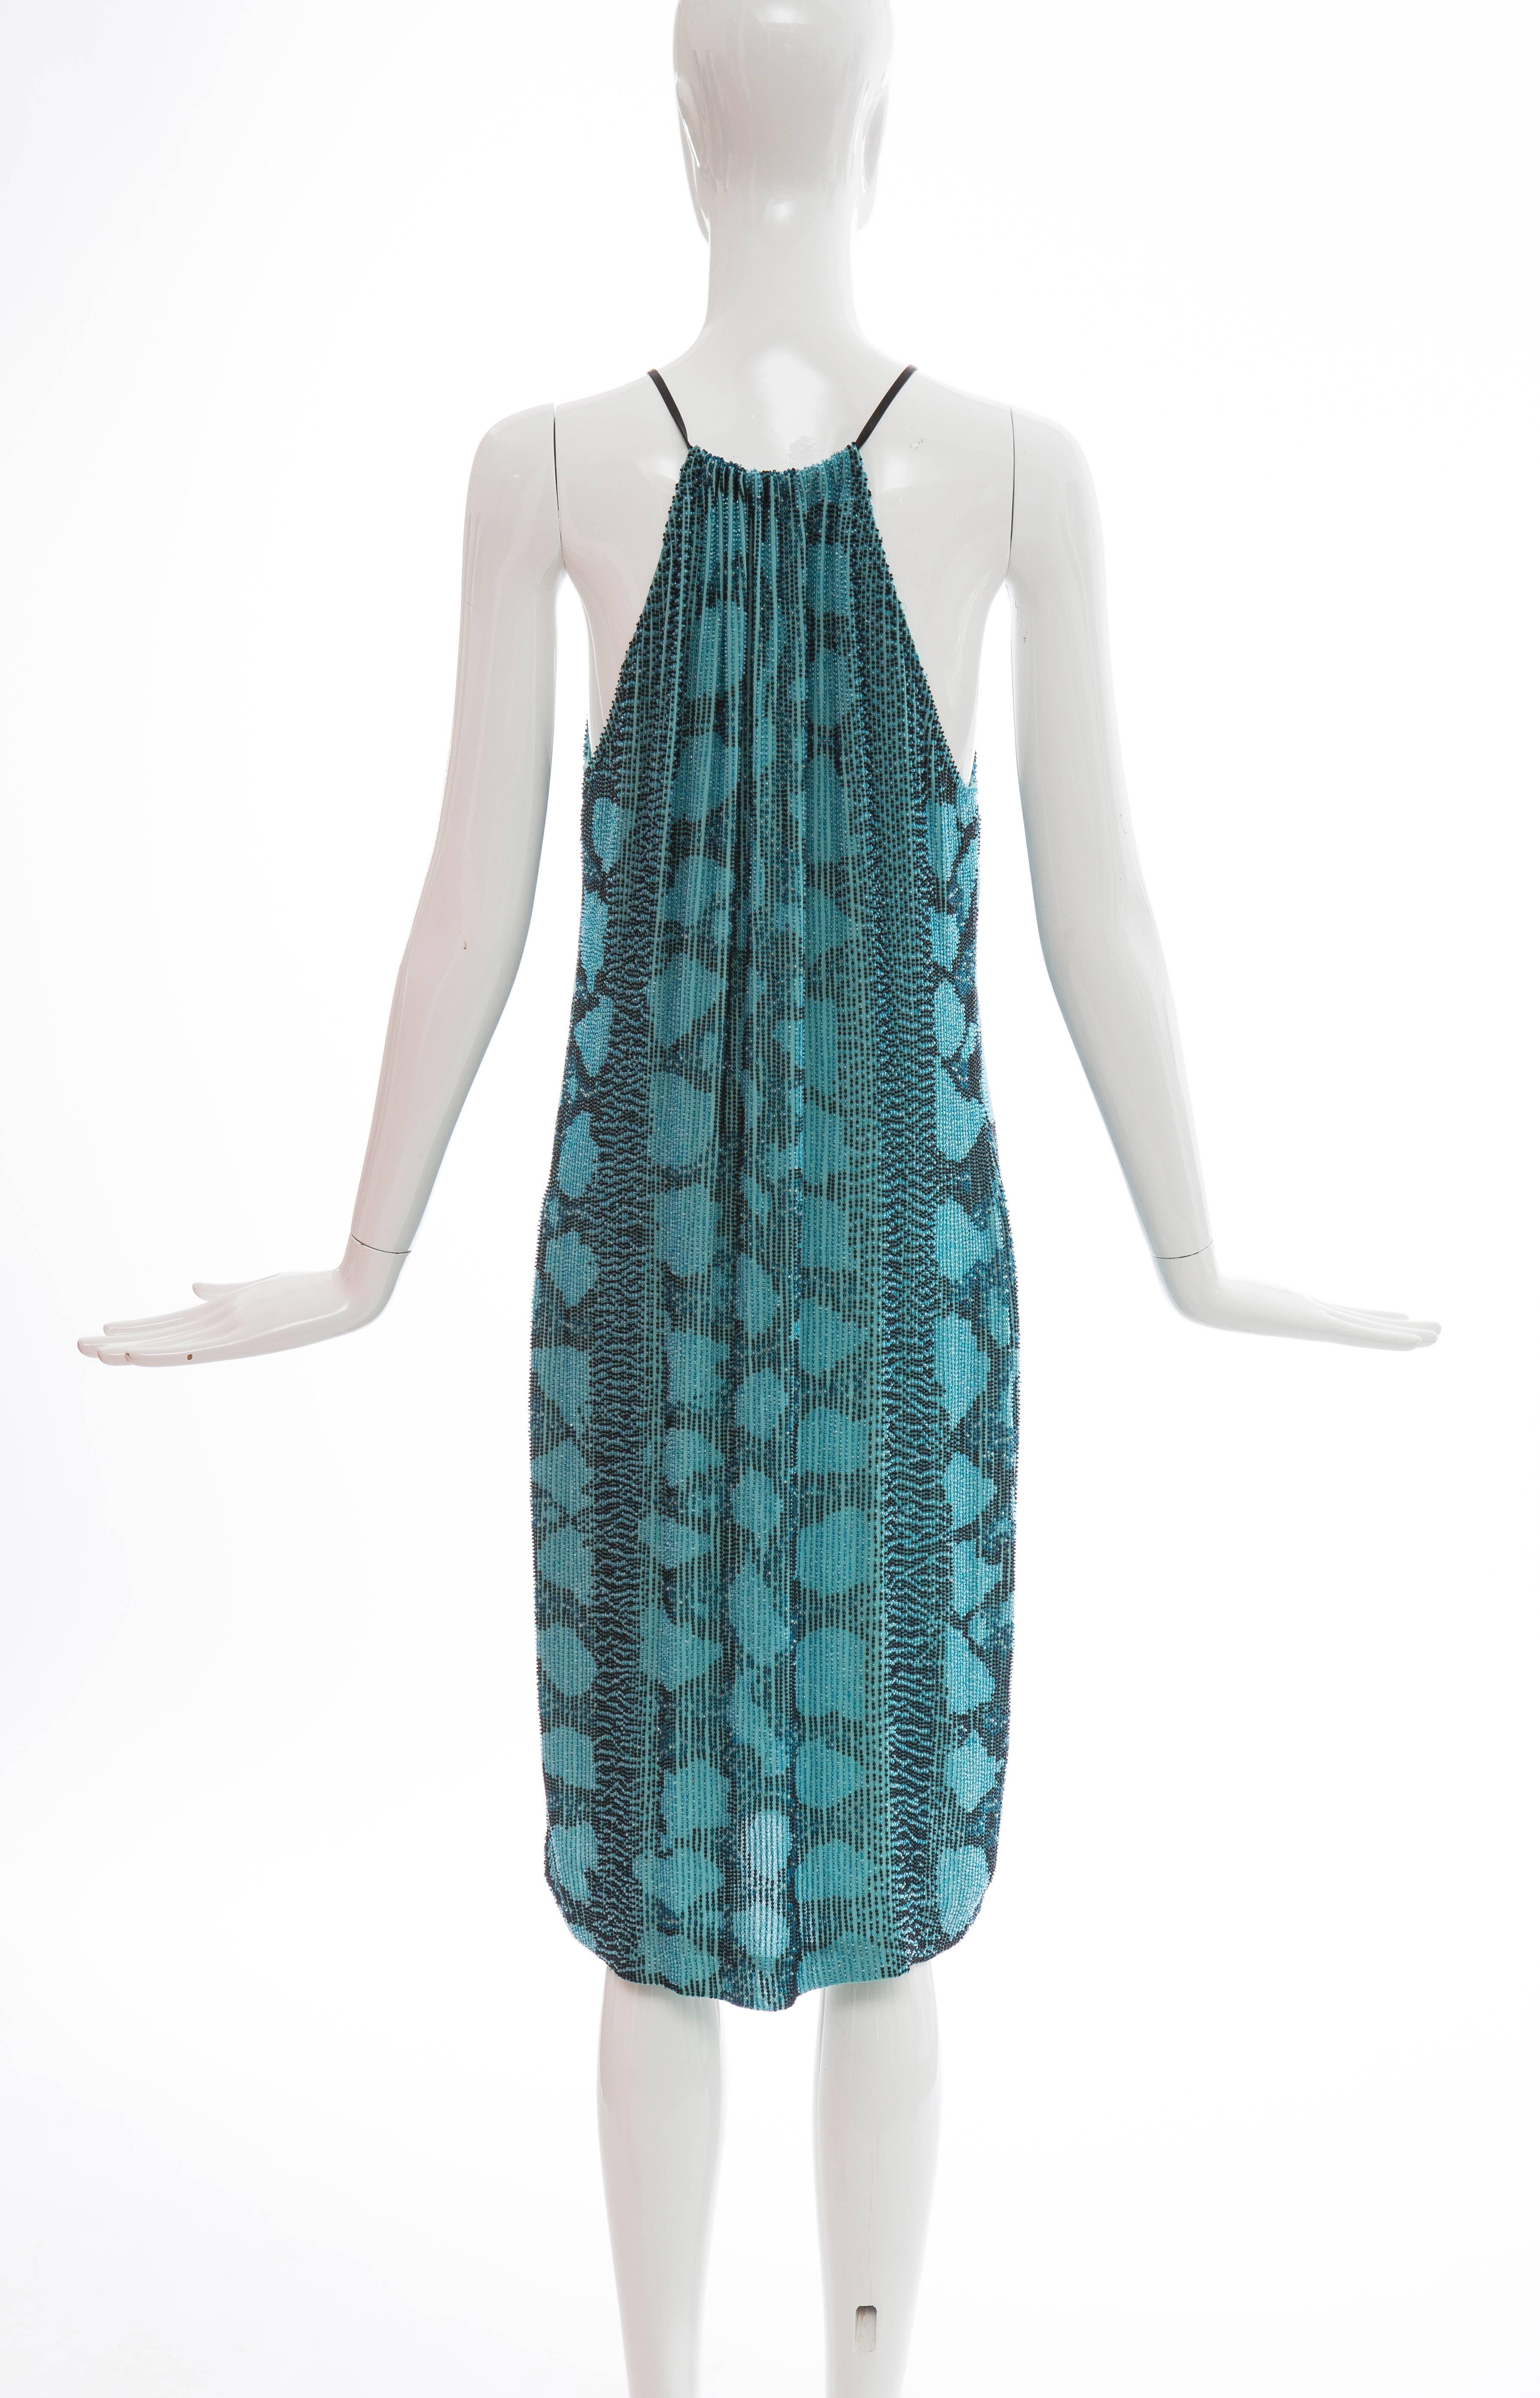 Tom Ford for Gucci Runway Silk Beaded Python Print Shift Dress, Spring 2000 In Excellent Condition For Sale In Cincinnati, OH